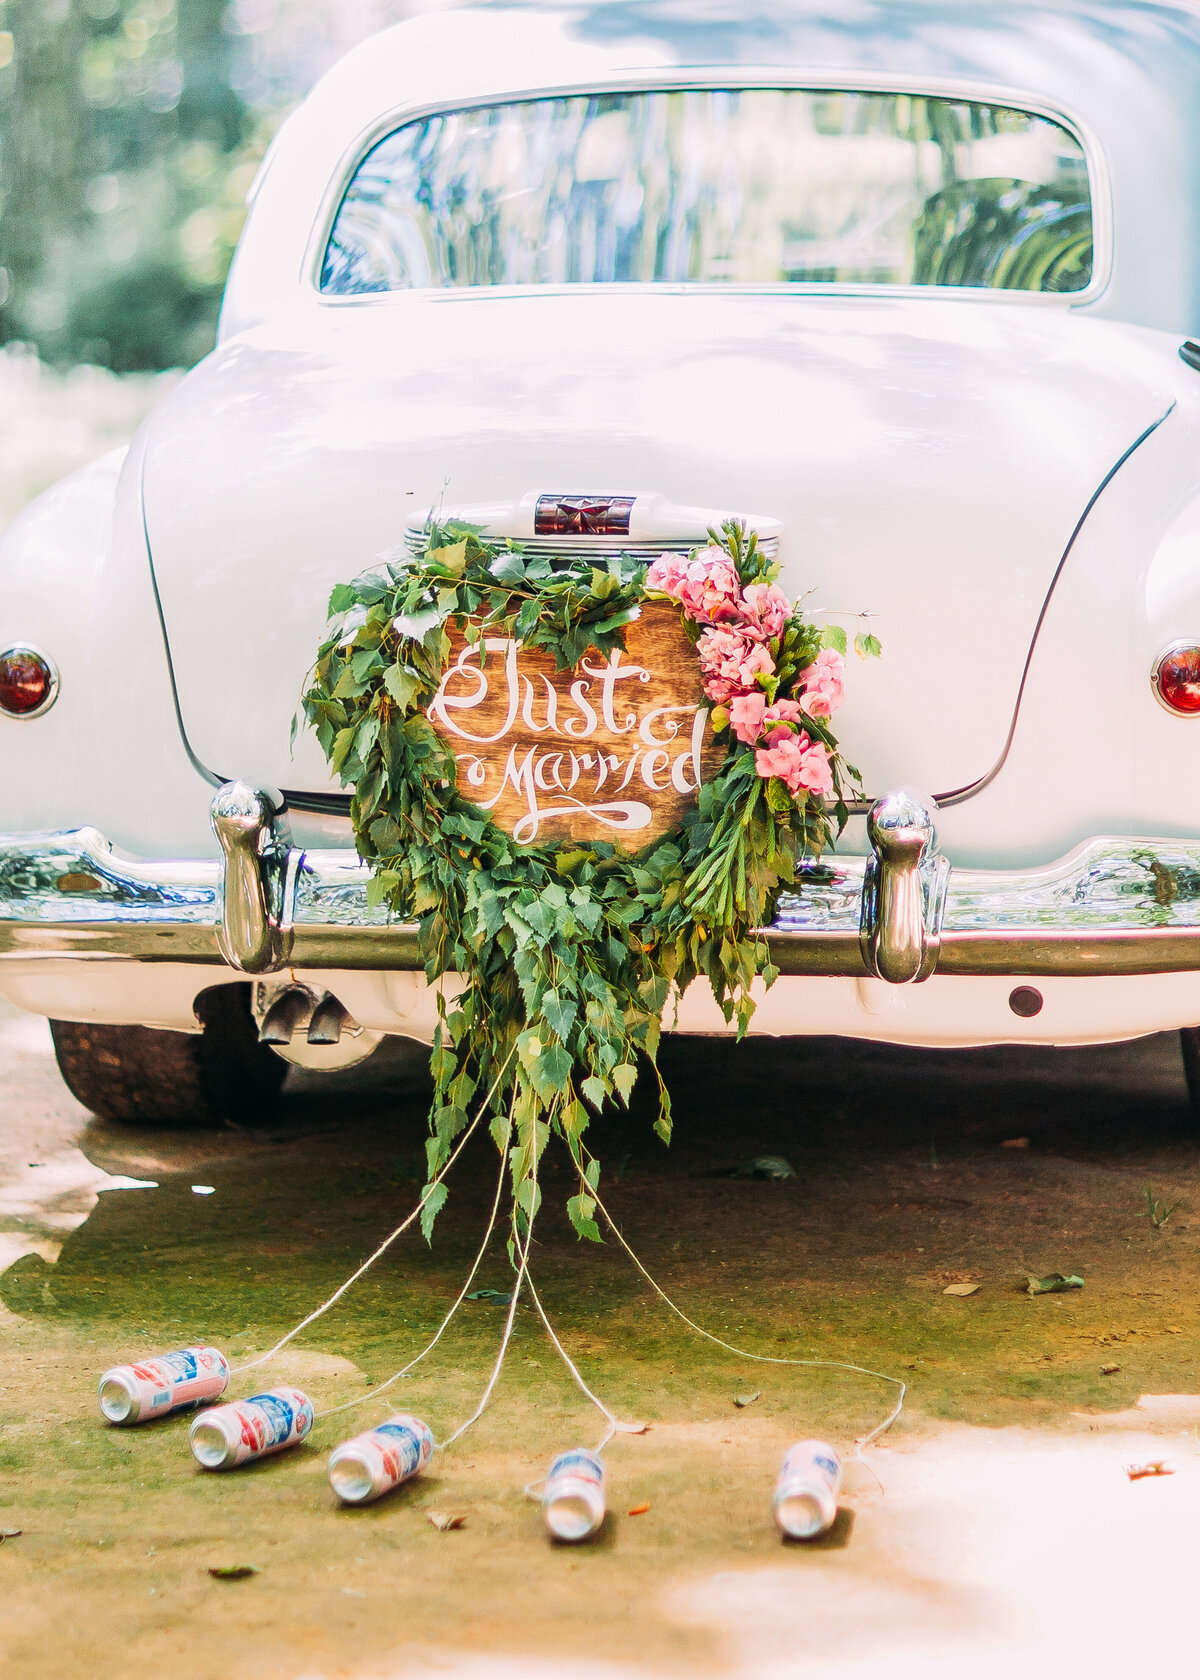 Vintage white wedding car with a just married sign surrounded by flowers with cans attached.